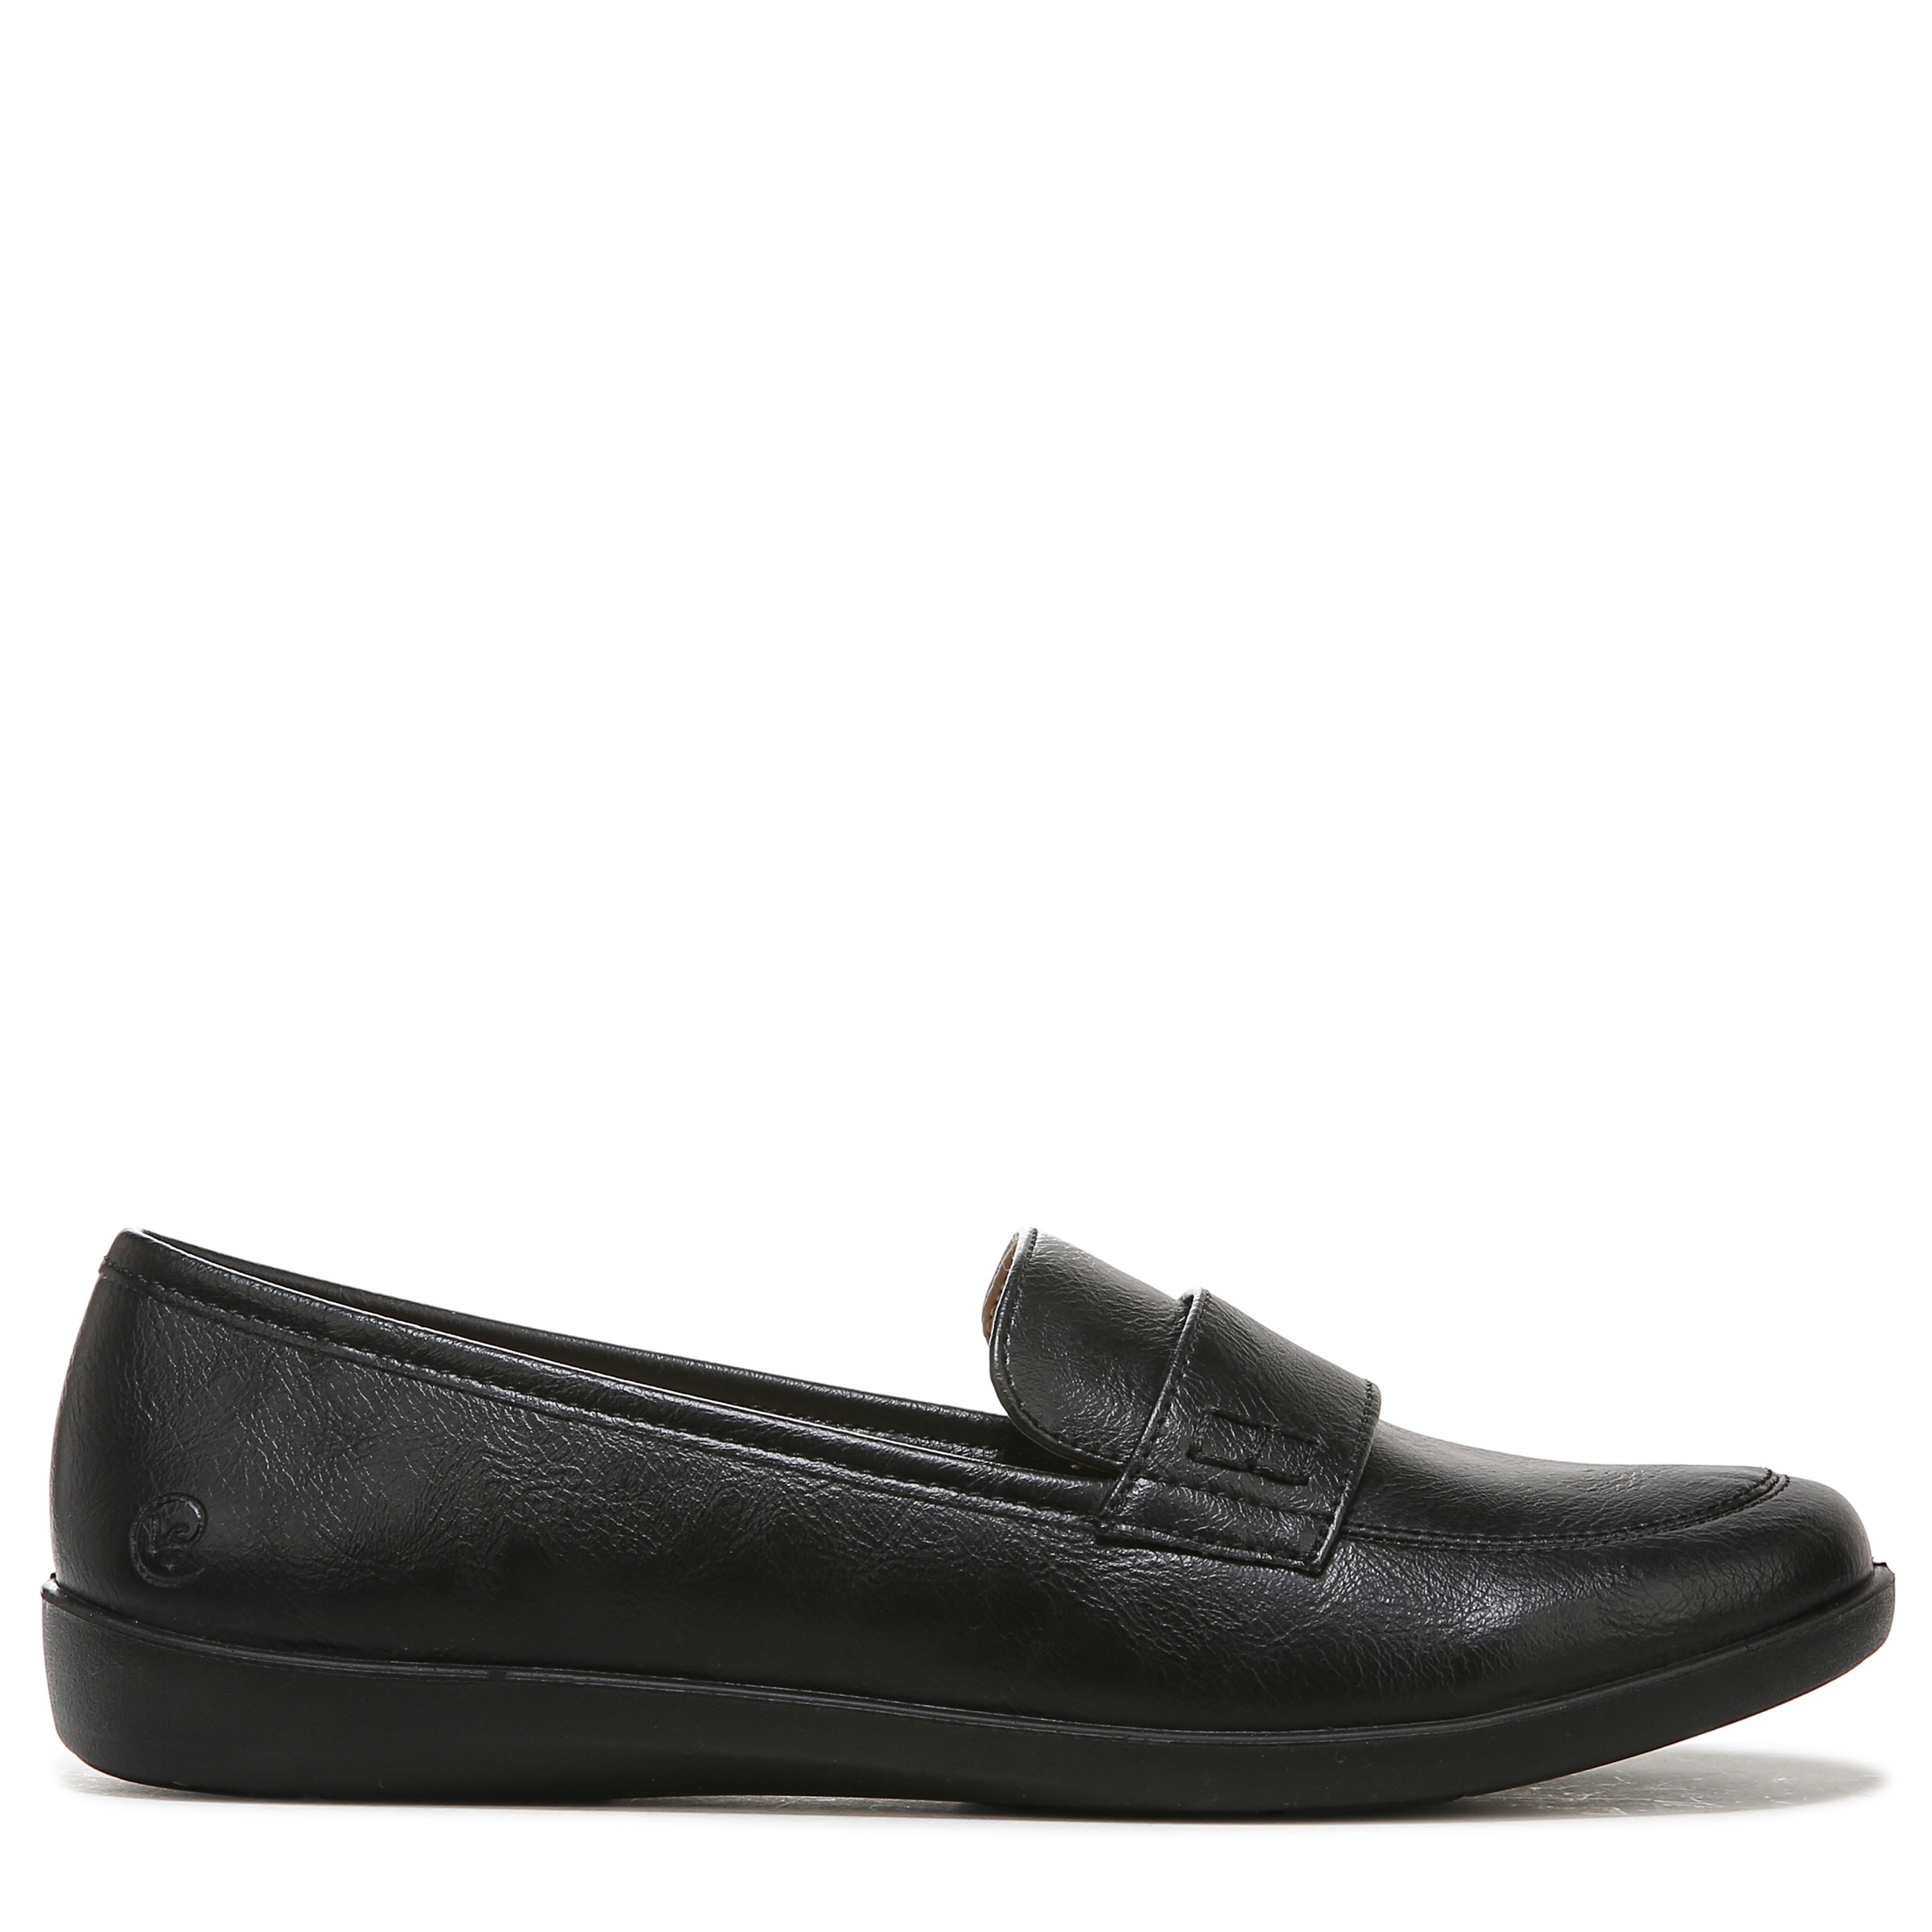 Women's Nico Slip On Casual Loafer